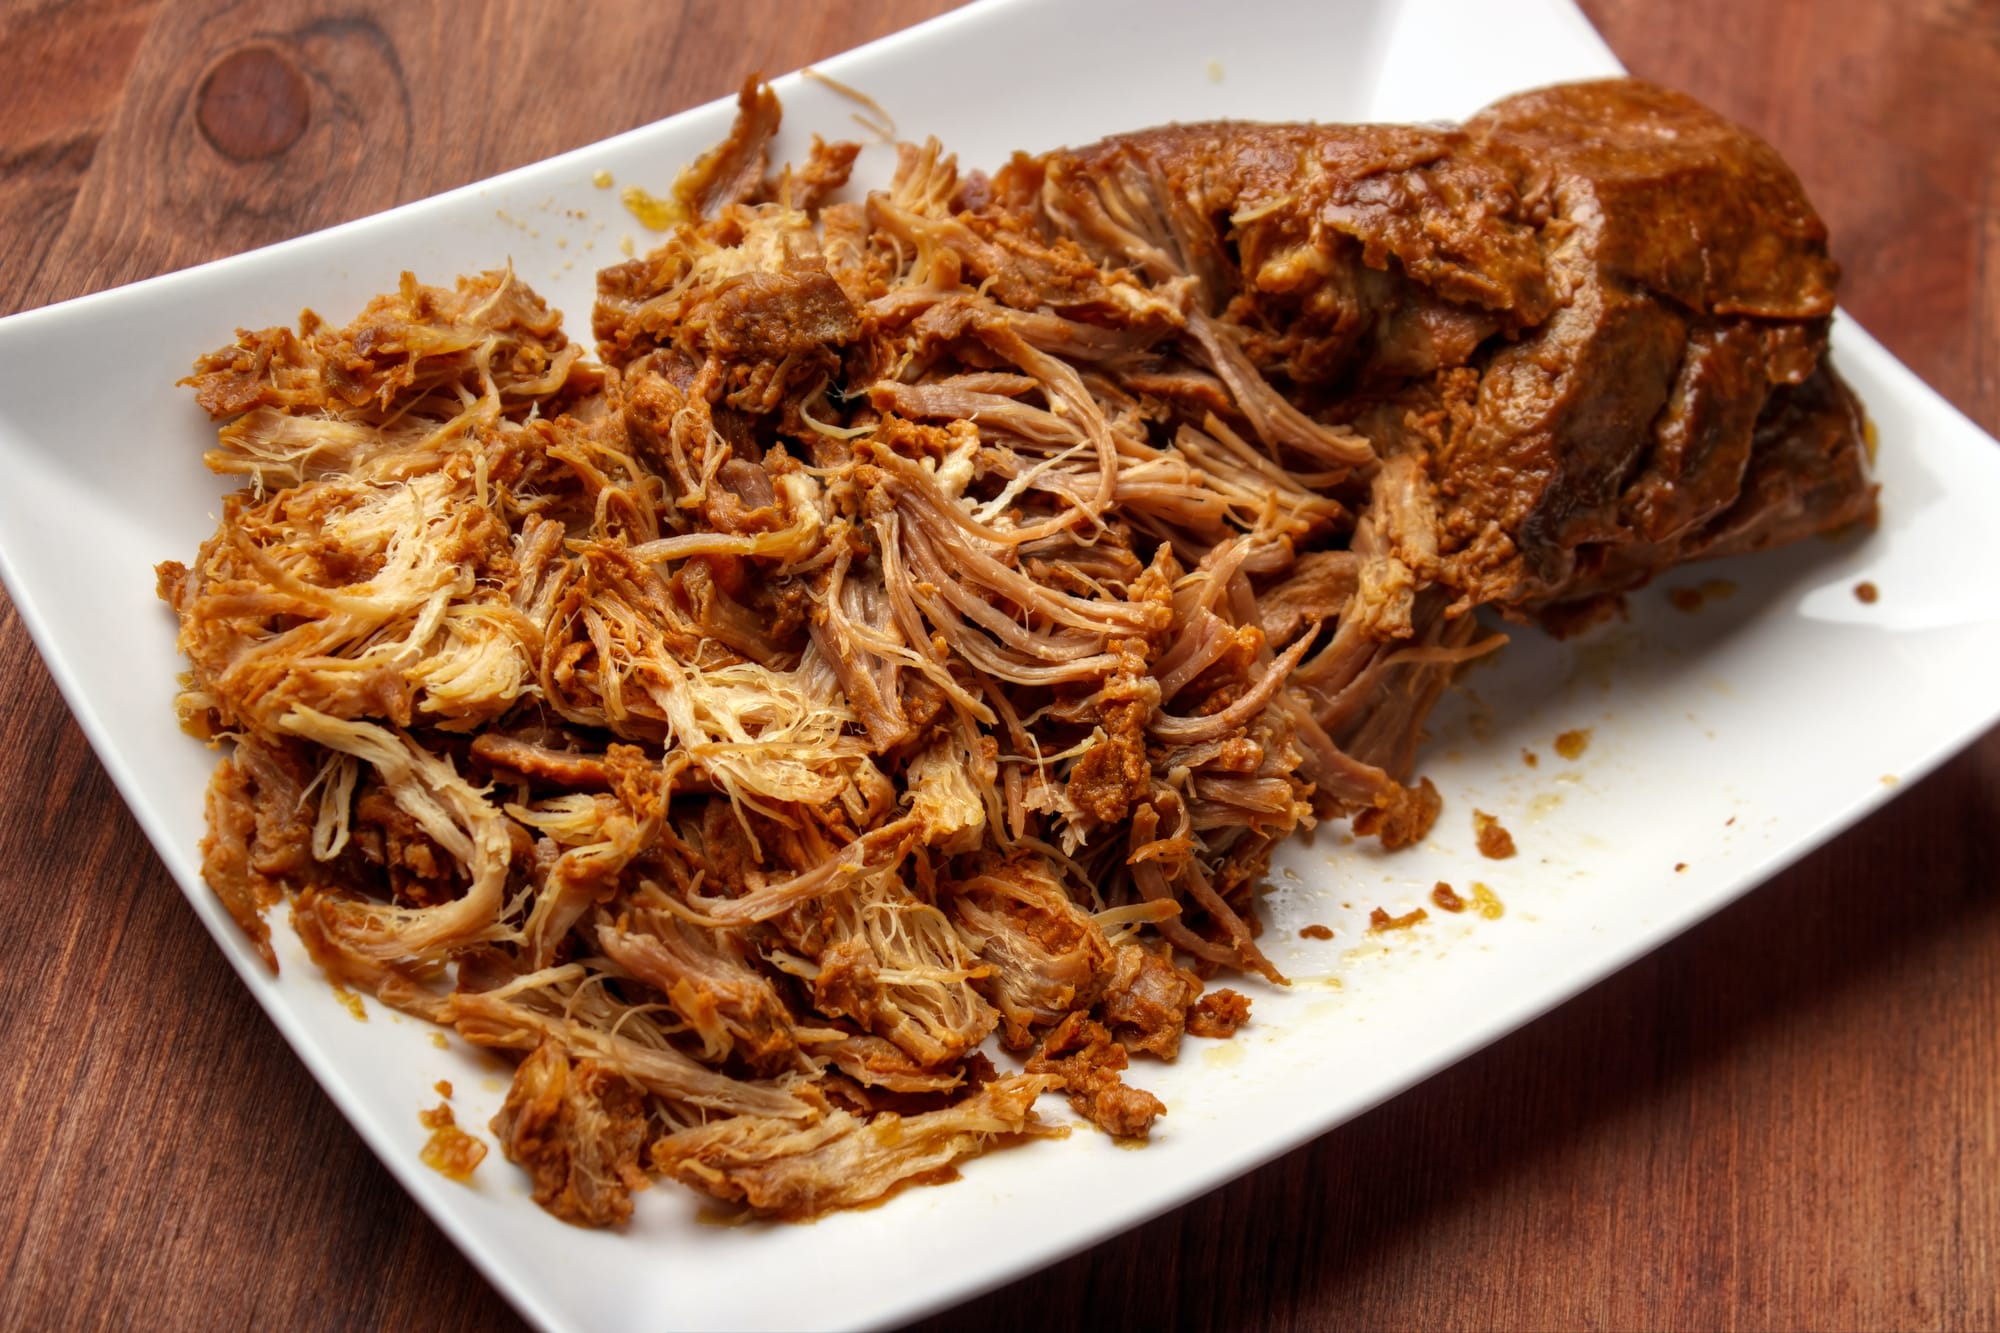 What to serve with pulled pork